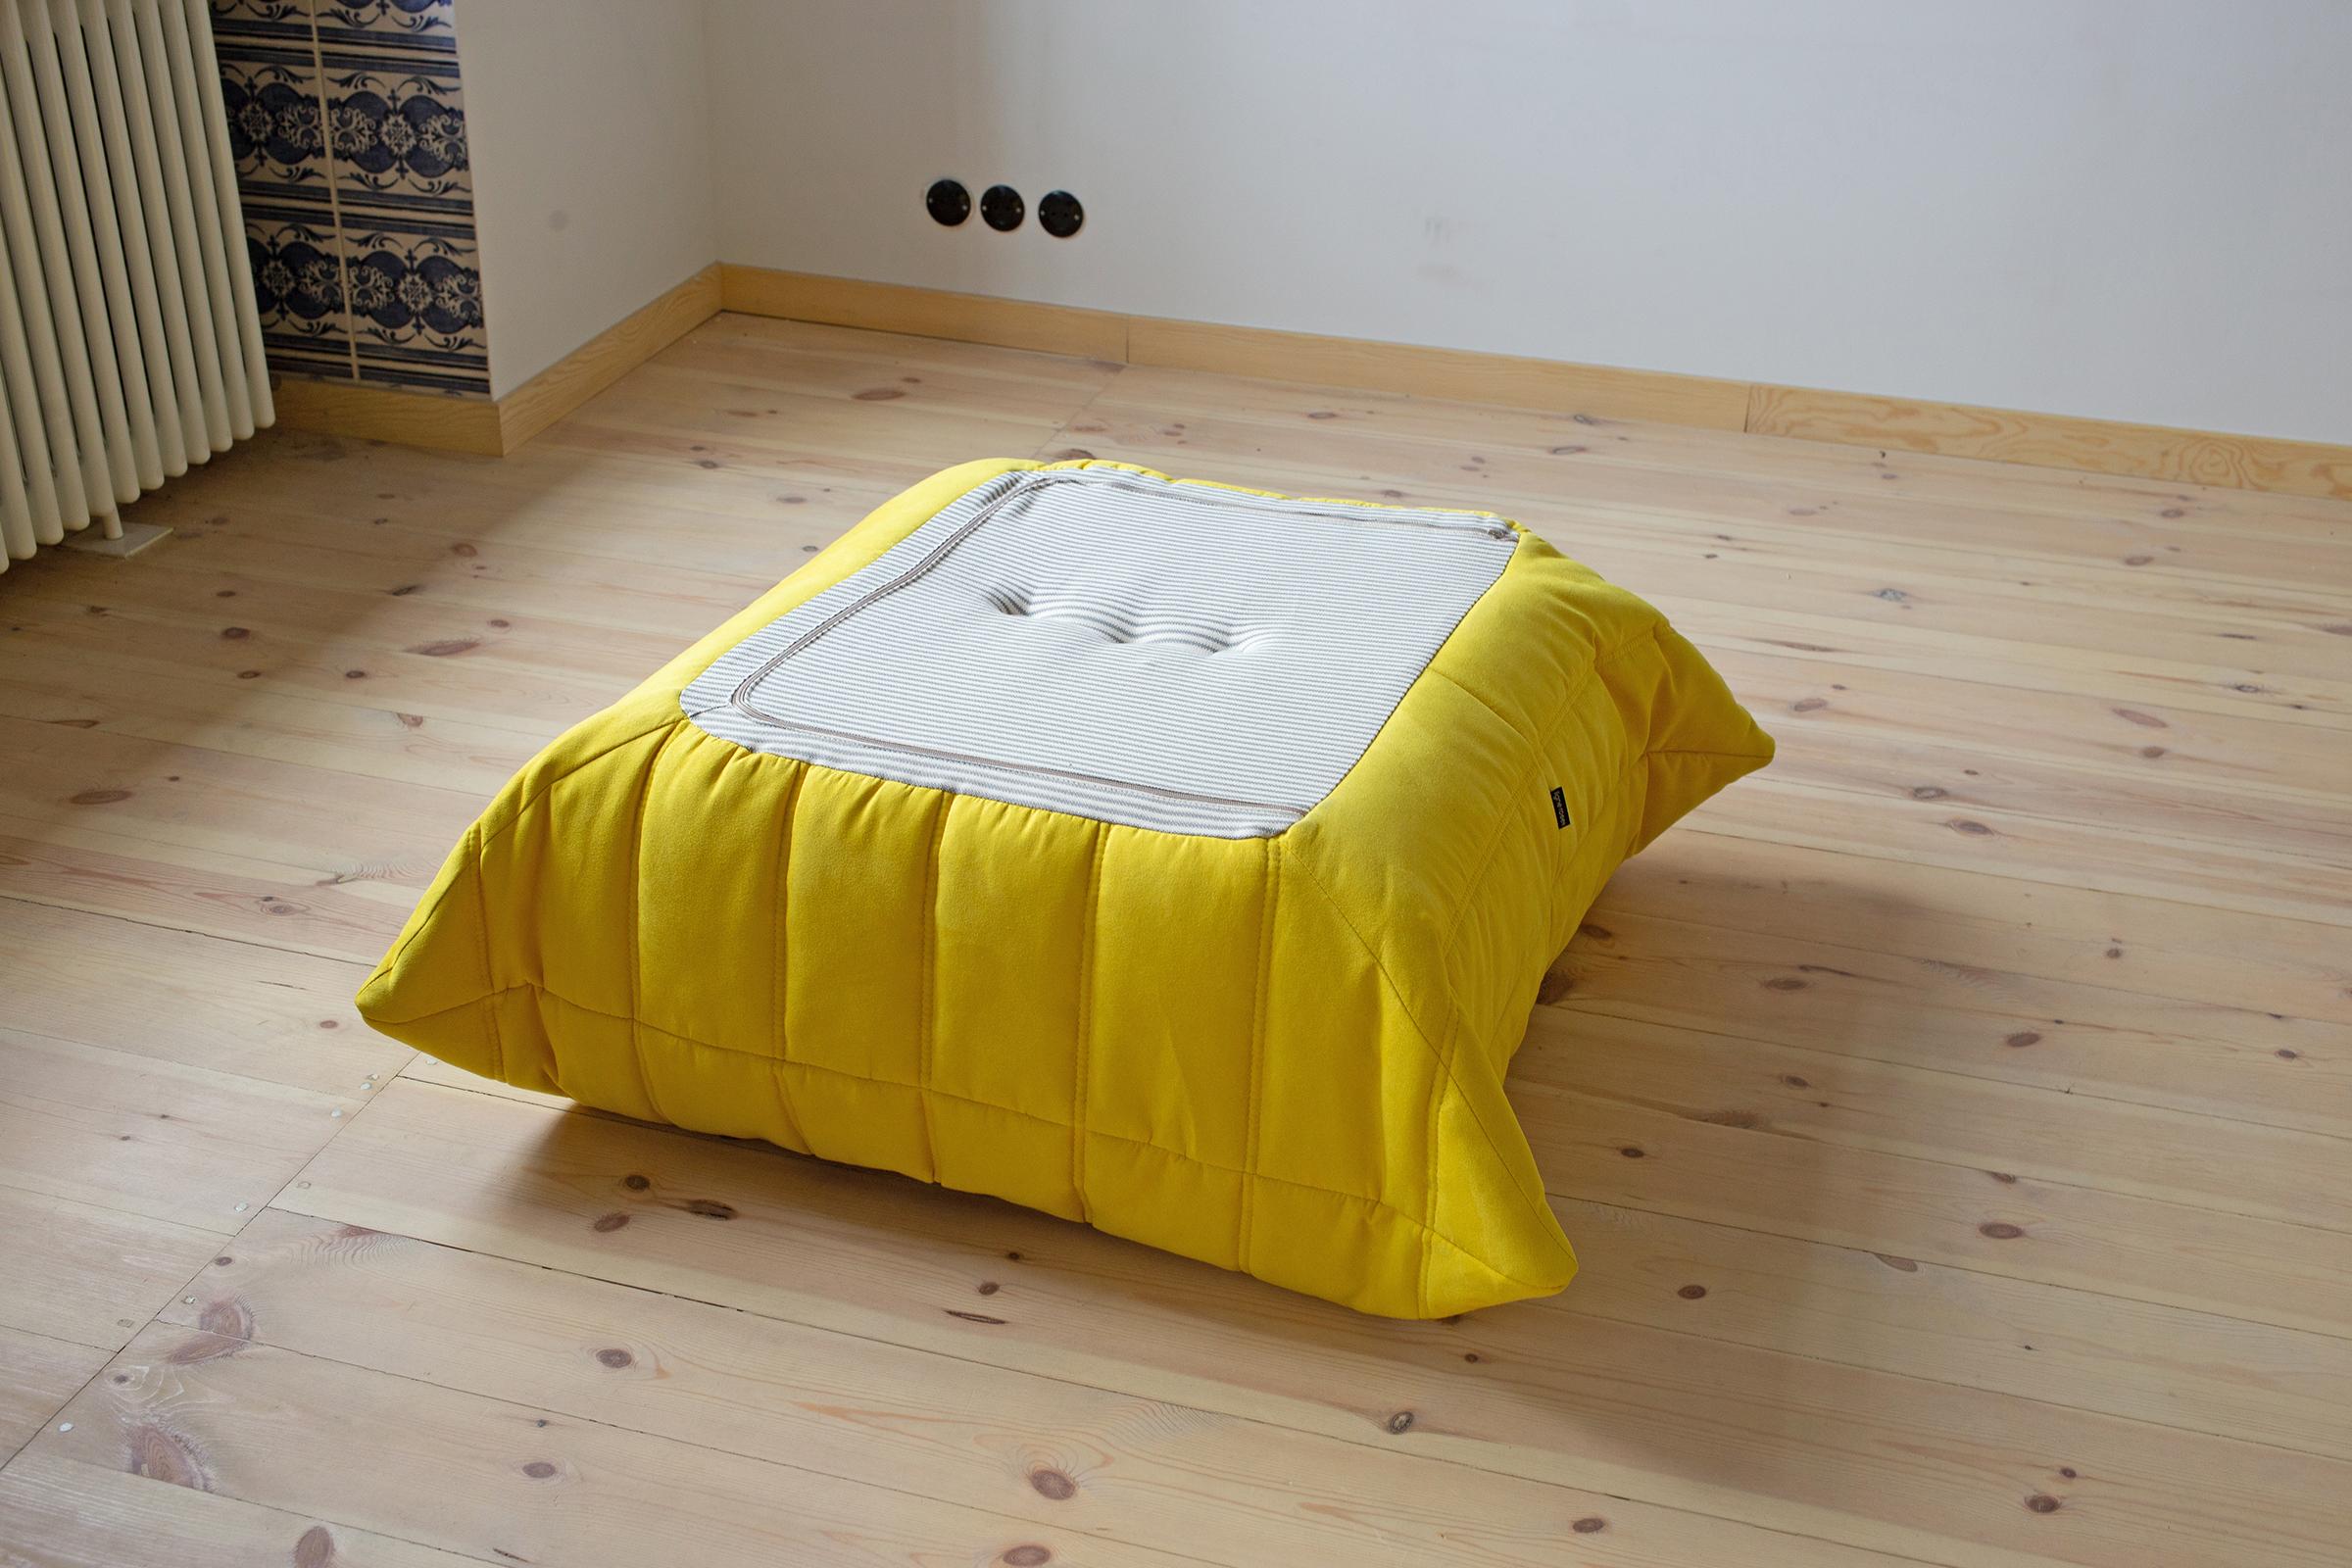 This Togo ottoman was designed by Michel Ducaroy in 1973 and was manufactured by Ligne Roset in France. It has been reupholstered in new yellow microfibre (87 x 80 x 34 cm). It has the original Ligne Roset logo and genuine Ligne Roset bottom.